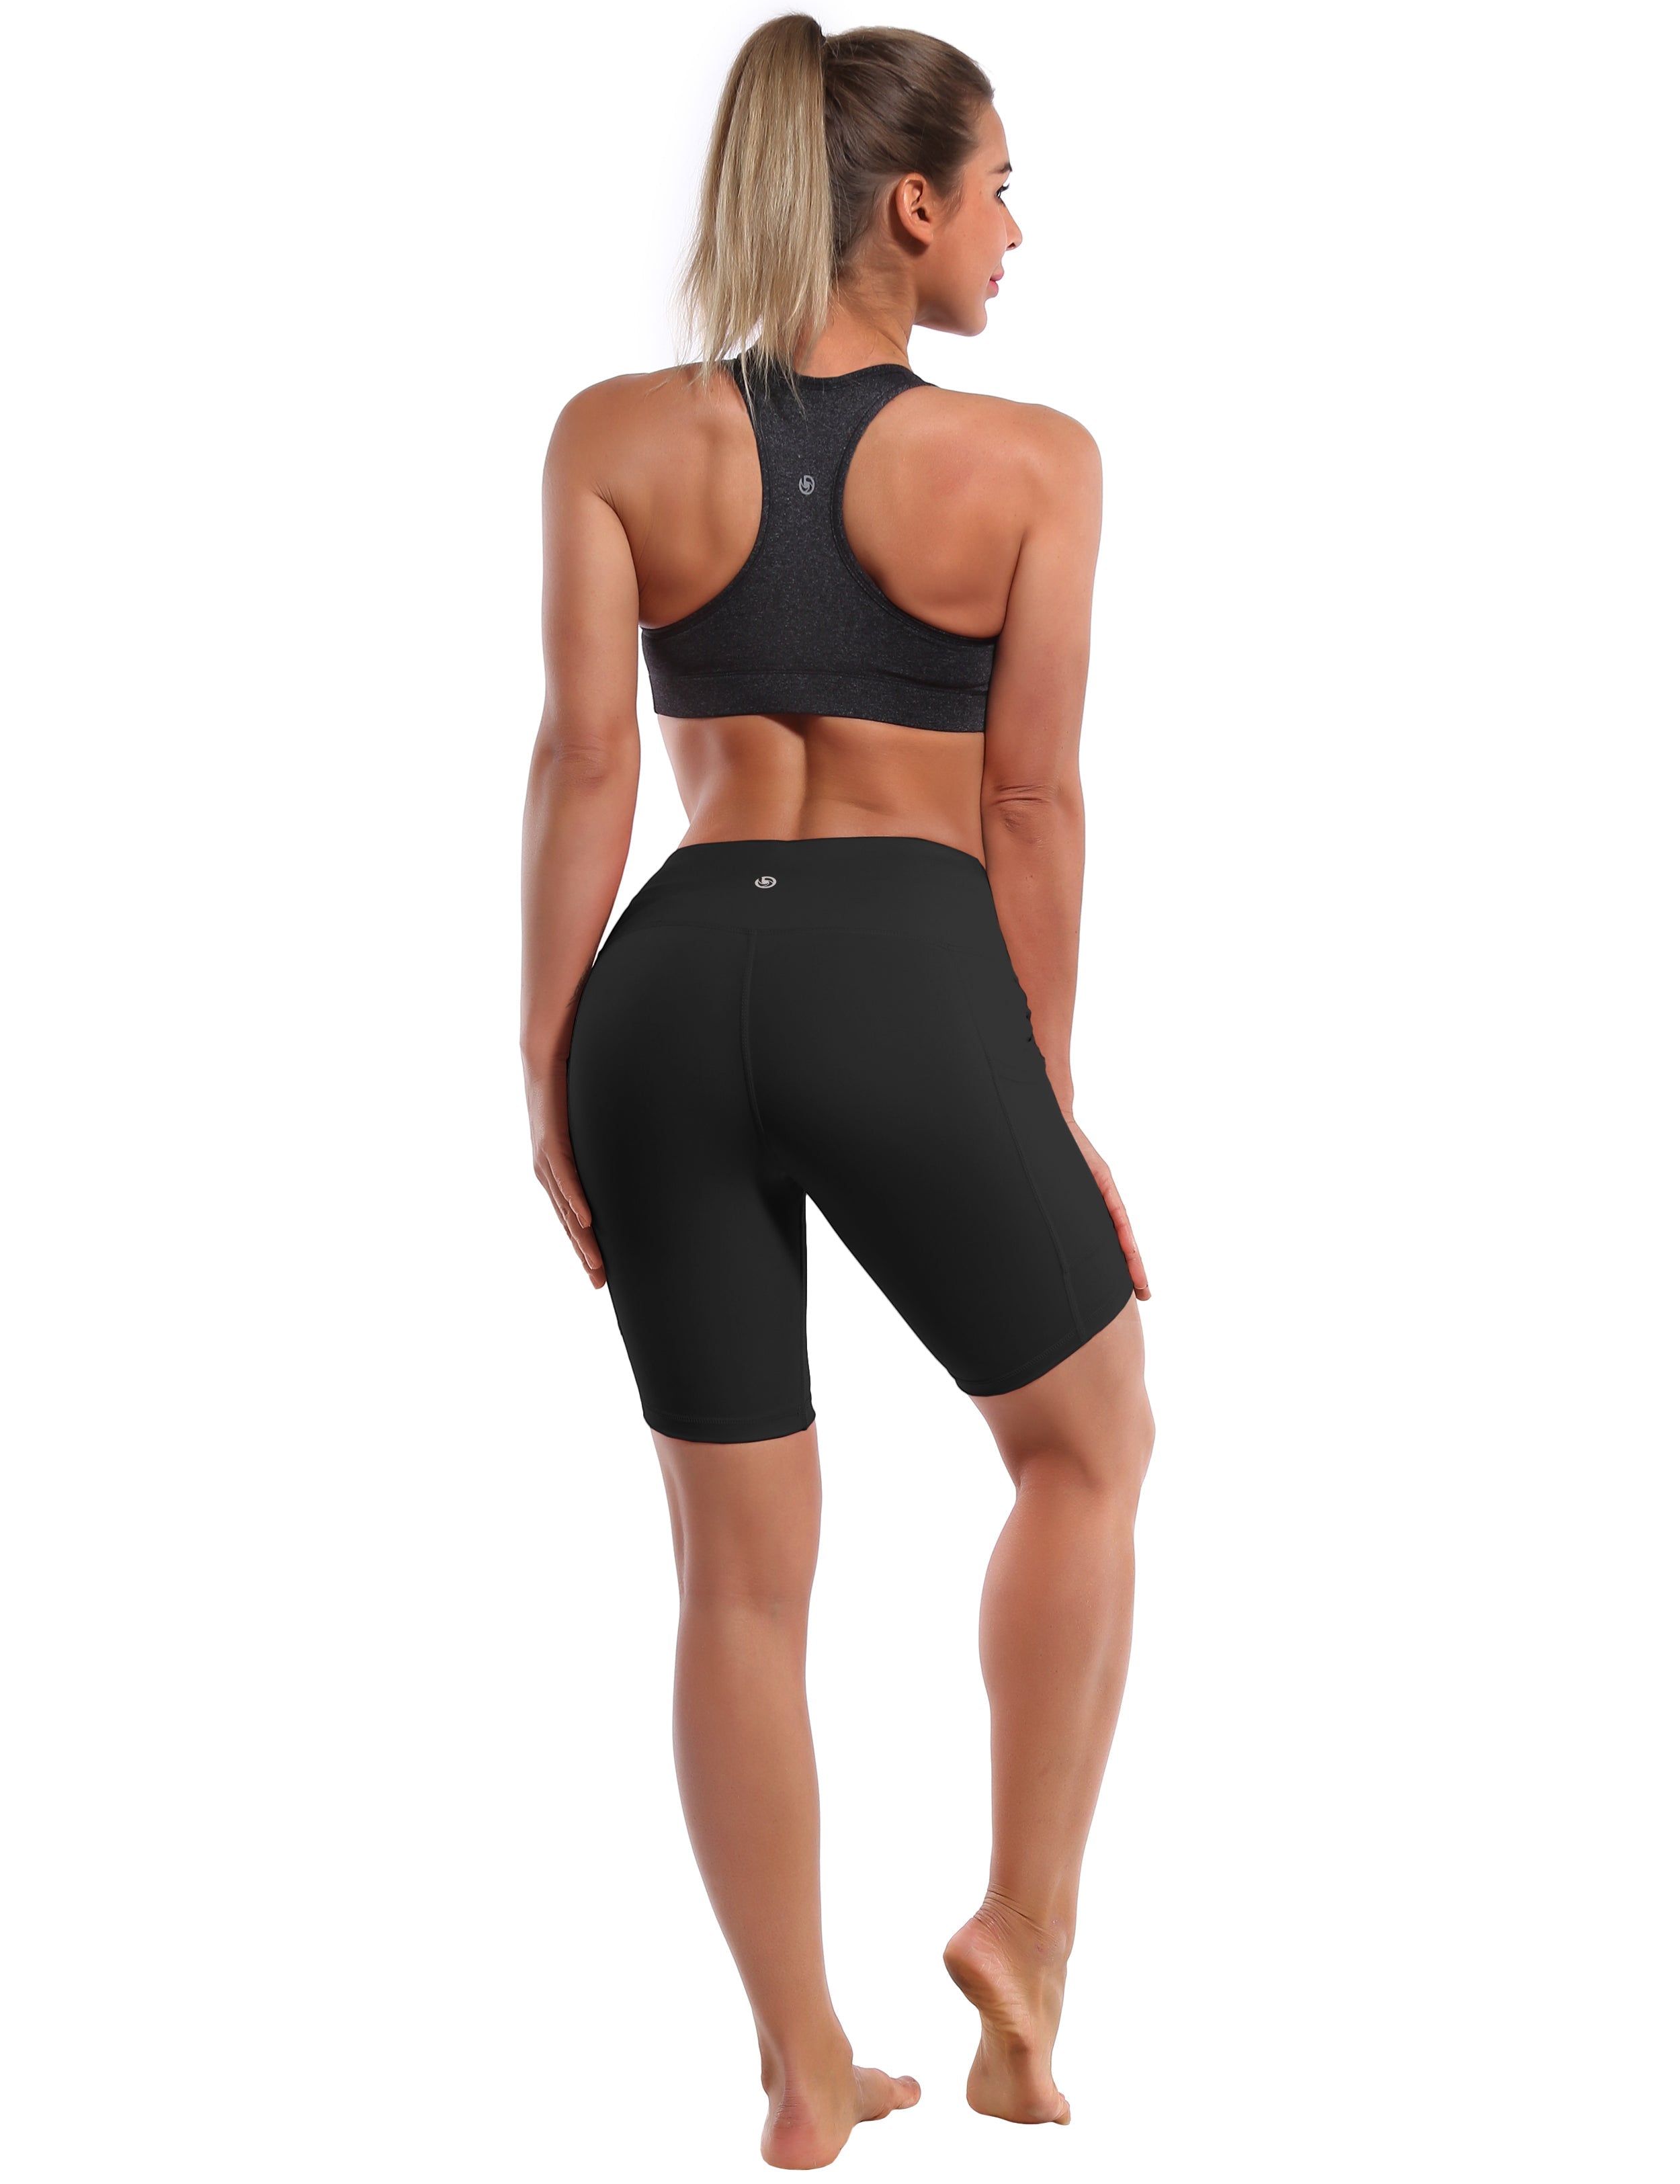 8" Side Pockets Jogging Shorts black Sleek, soft, smooth and totally comfortable: our newest style is here. Softest-ever fabric High elasticity High density 4-way stretch Fabric doesn't attract lint easily No see-through Moisture-wicking Machine wash 75% Nylon, 25% Spandex